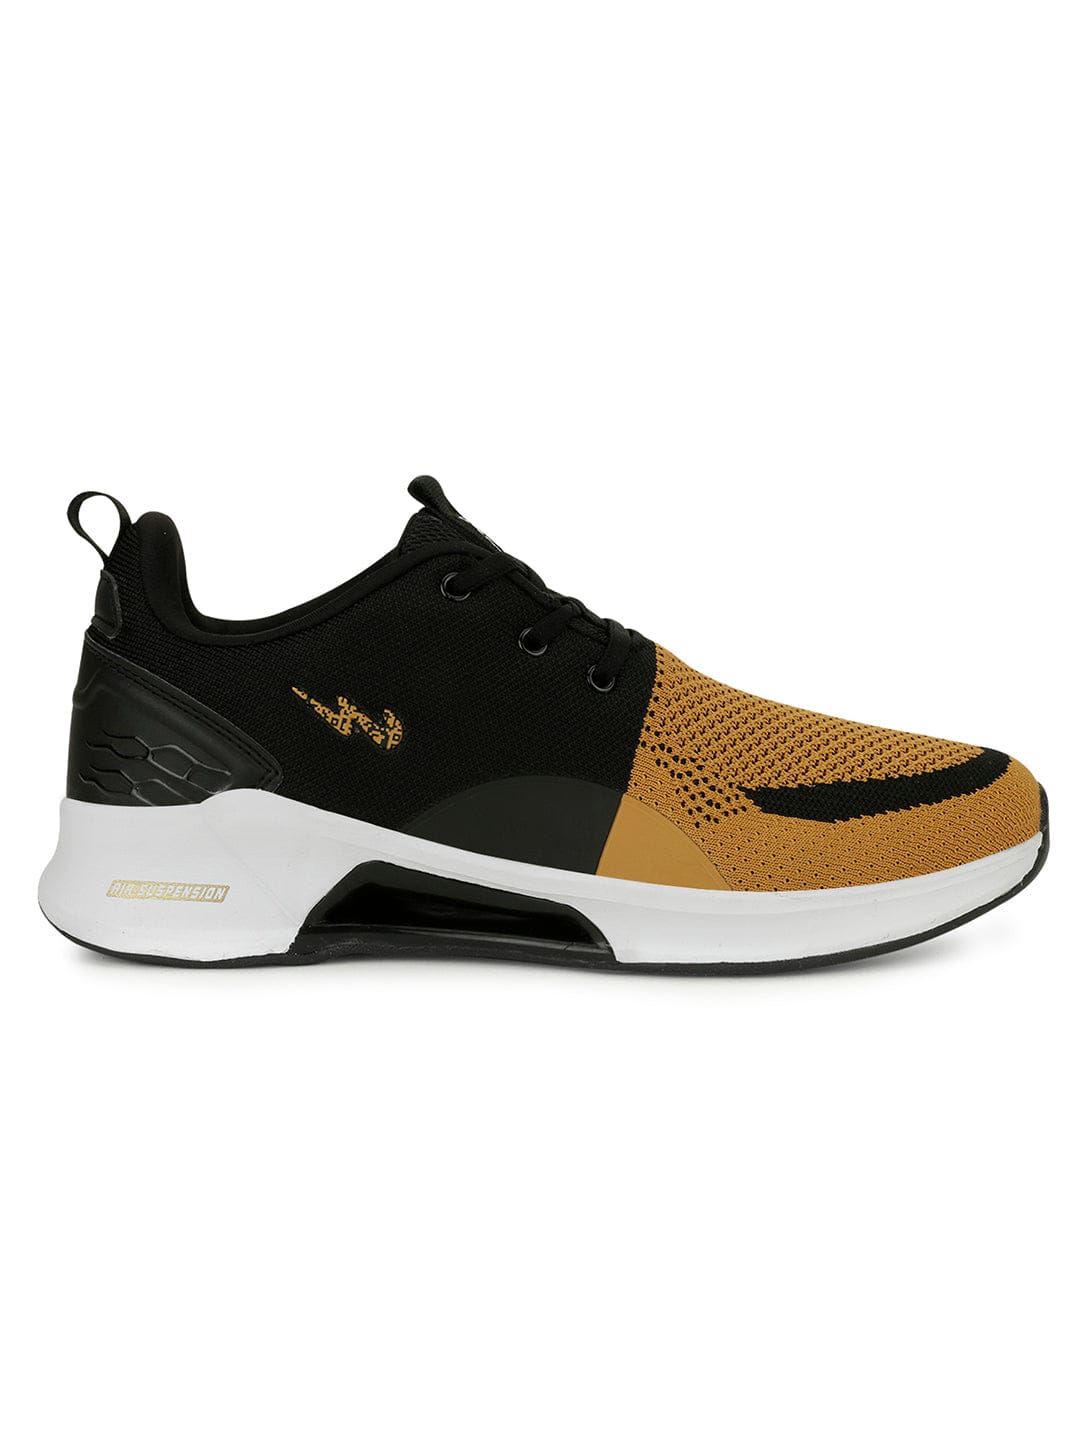 Buy CALIFORNIA Yellow Men's Running Shoes online | Campus Shoes